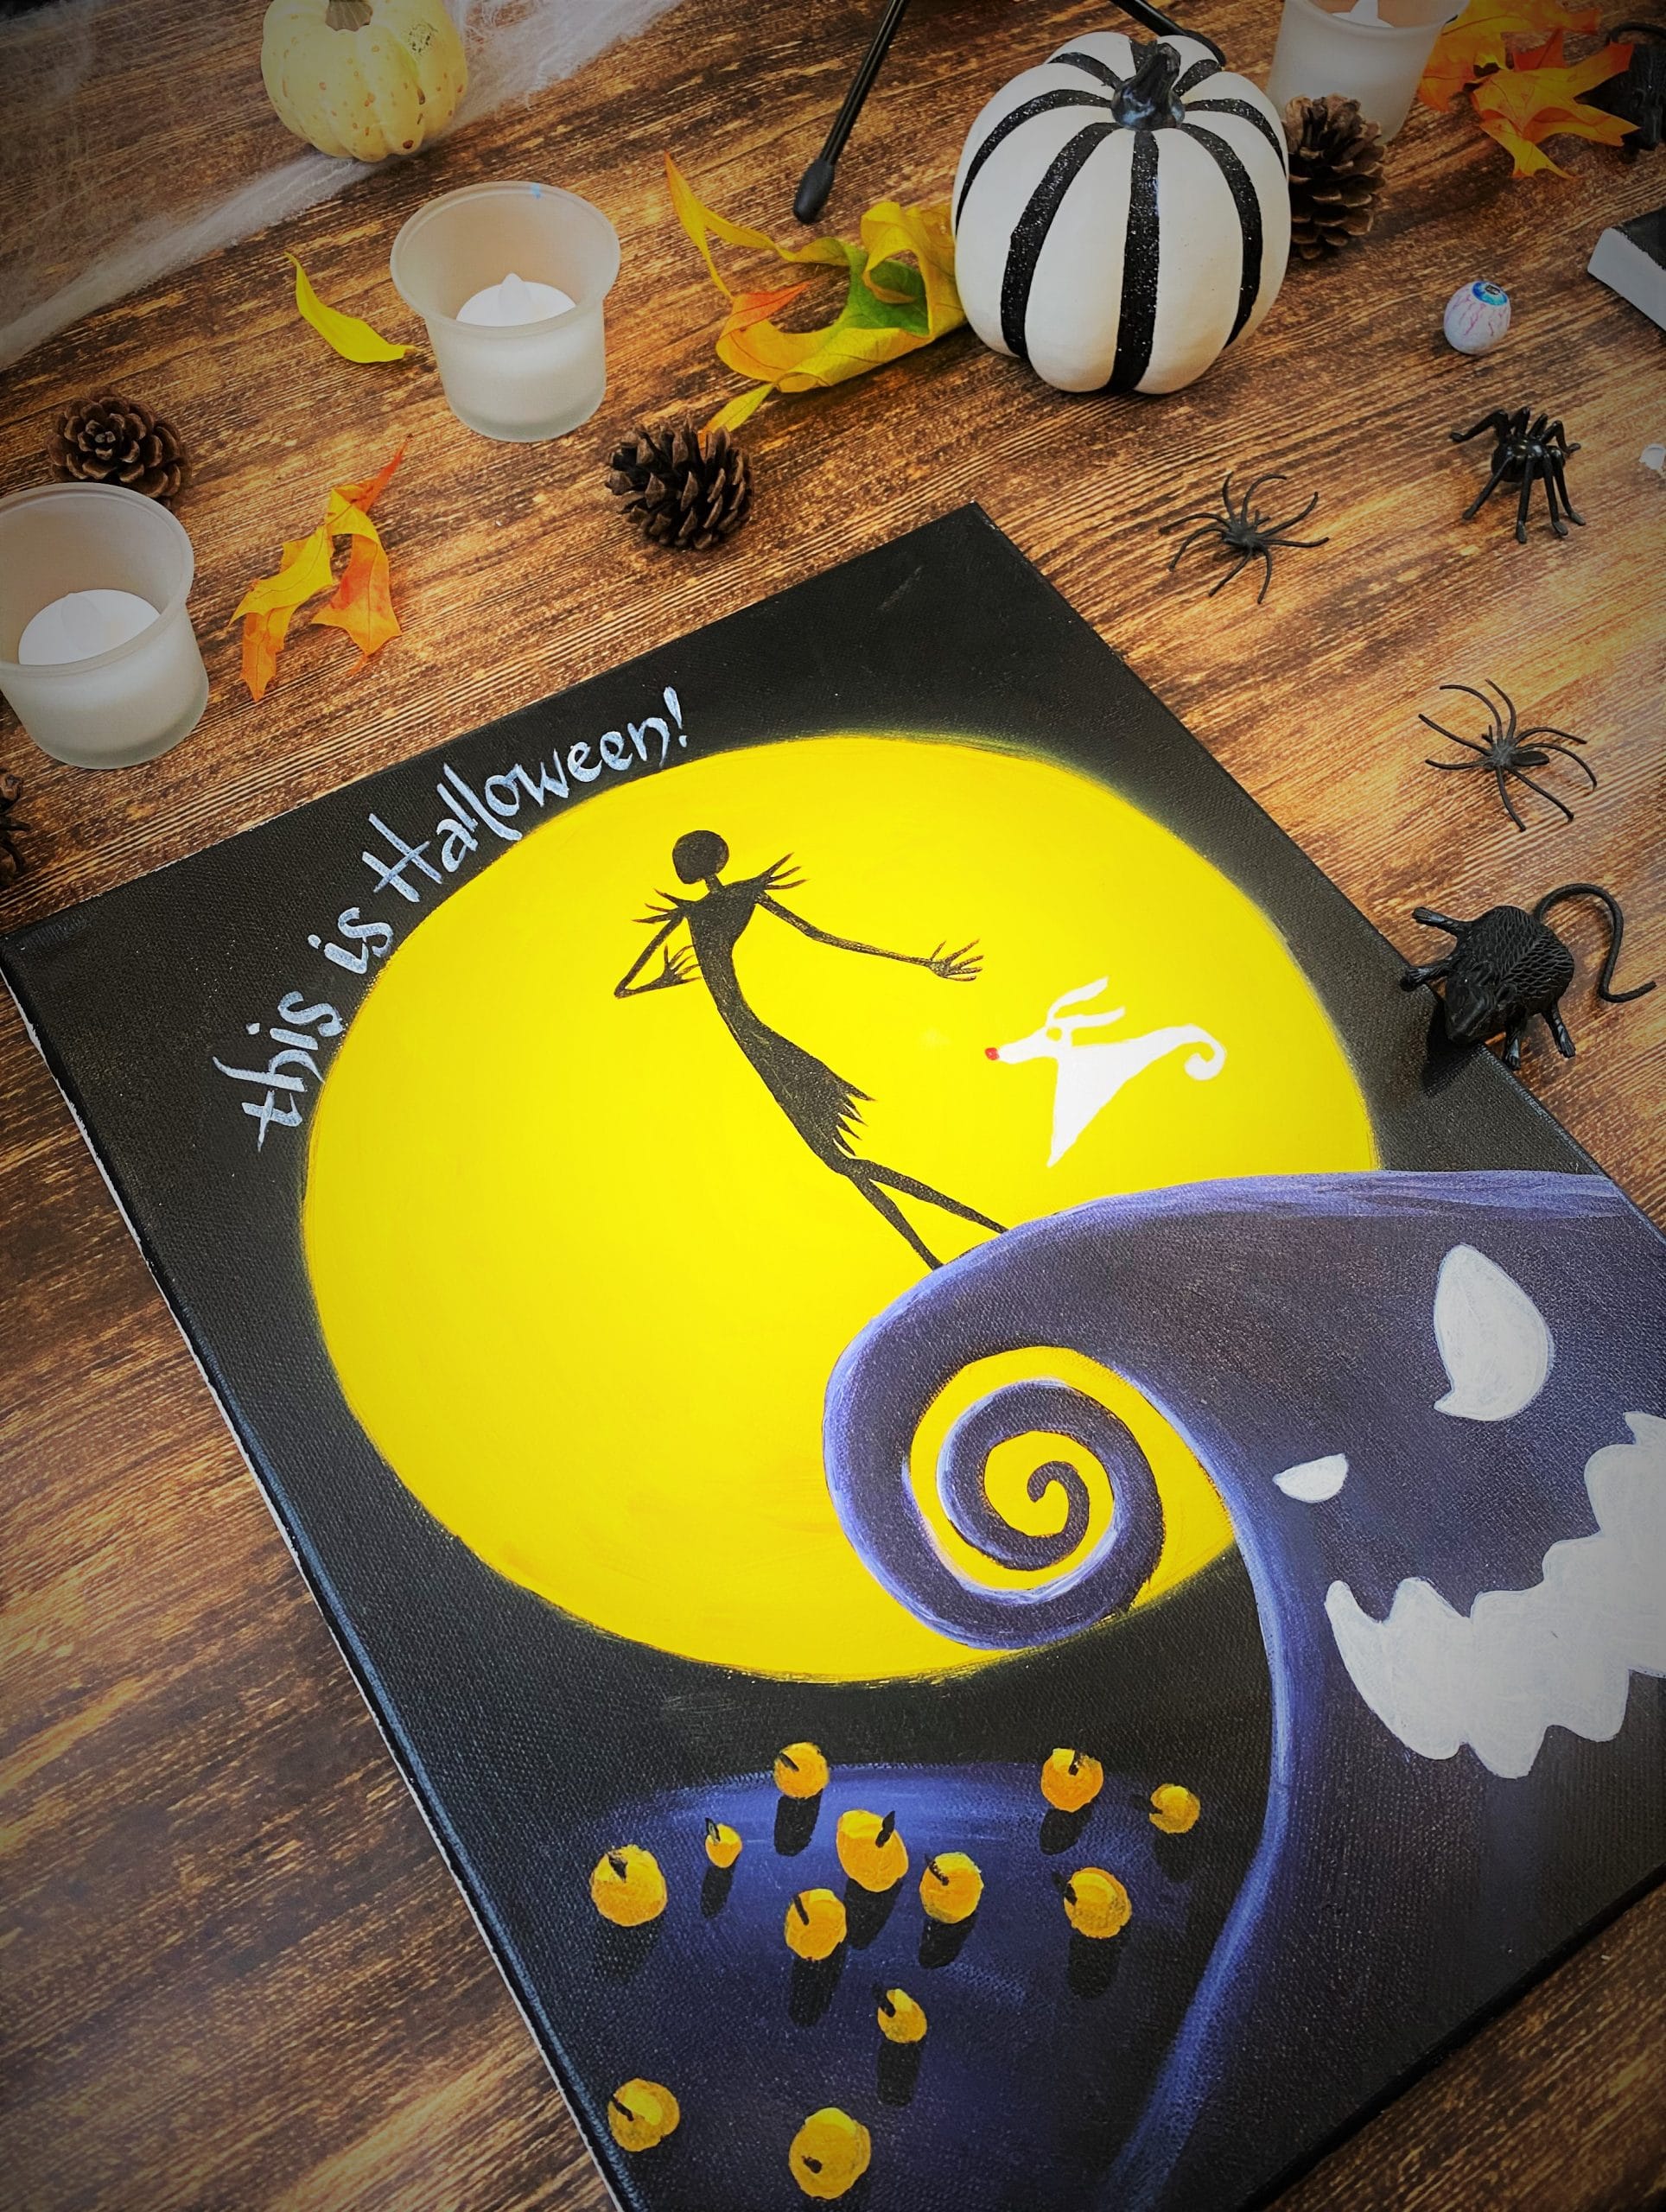 This is Halloween Paint at Home Kit and Video, Sip and Paint